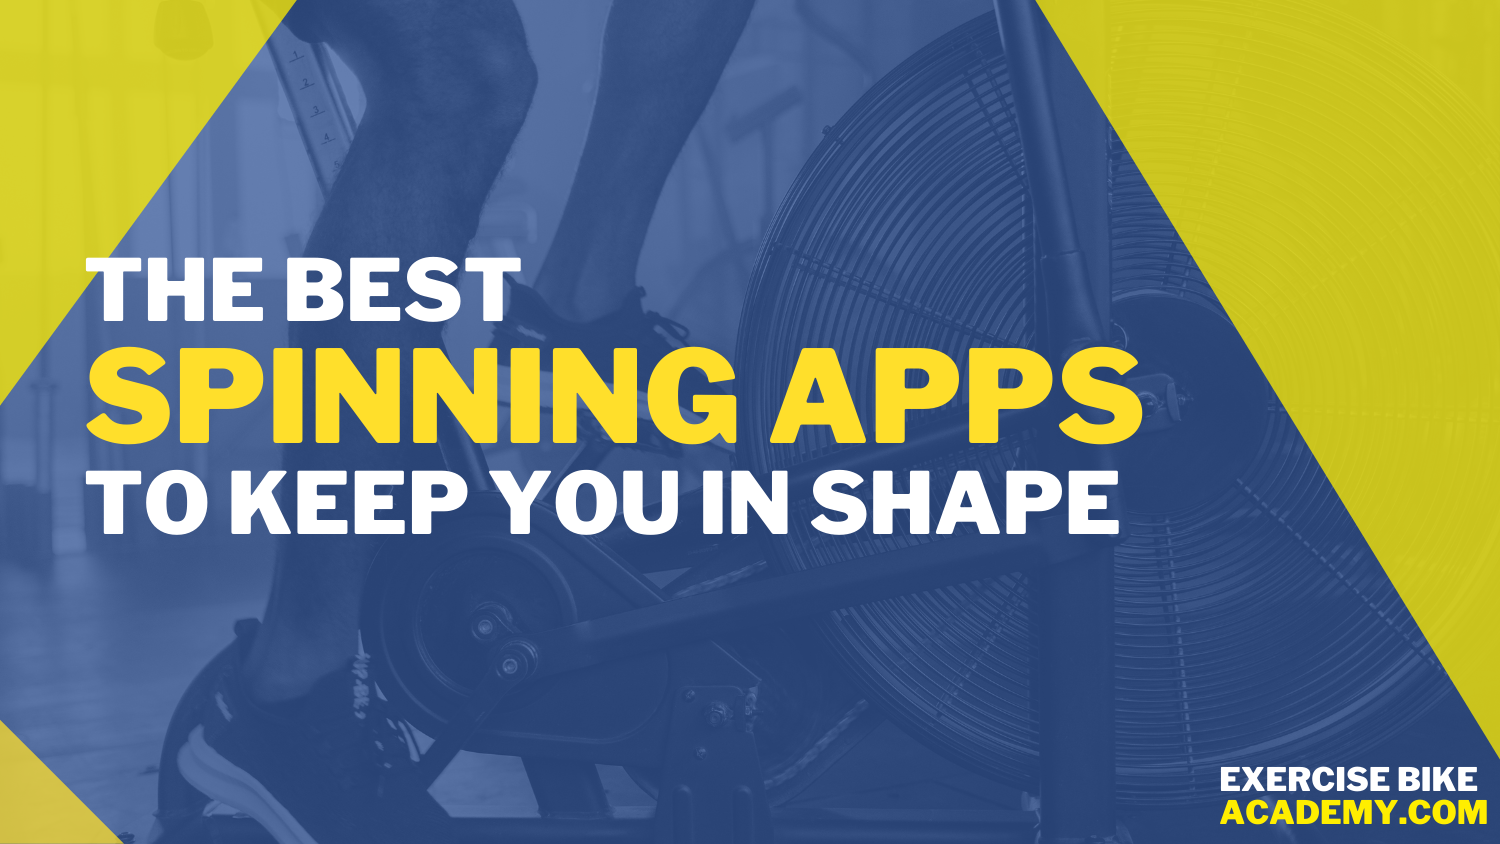 The best spinning apps